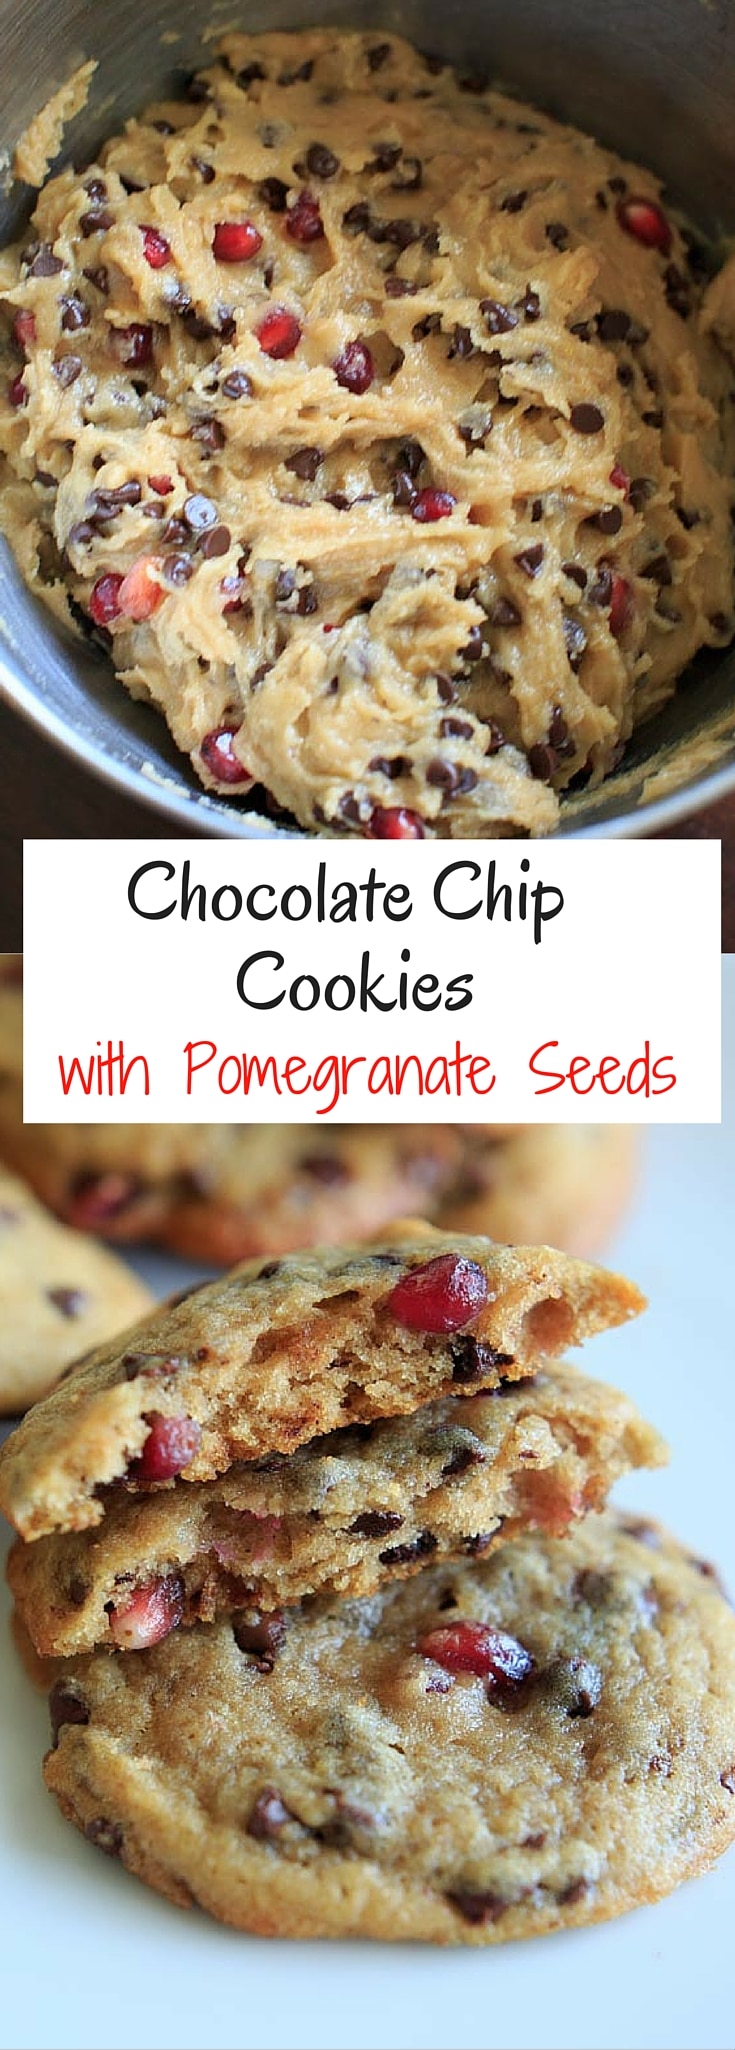 Chocolate Chip Cookies with Pomegranate Seeds pin